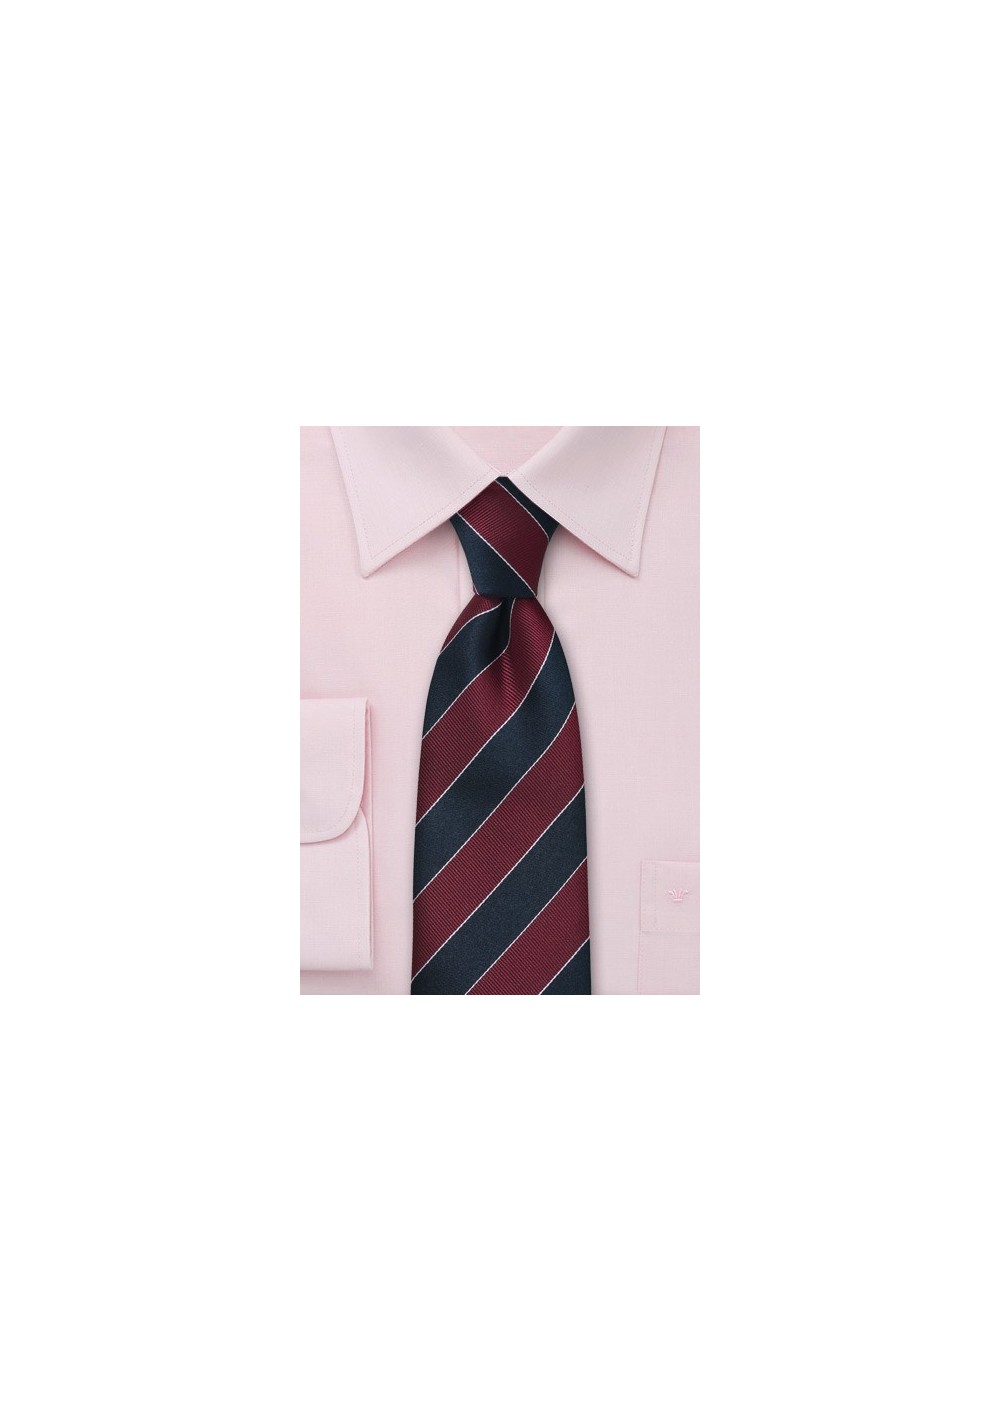 Striped Tie in Burgundy and Blue